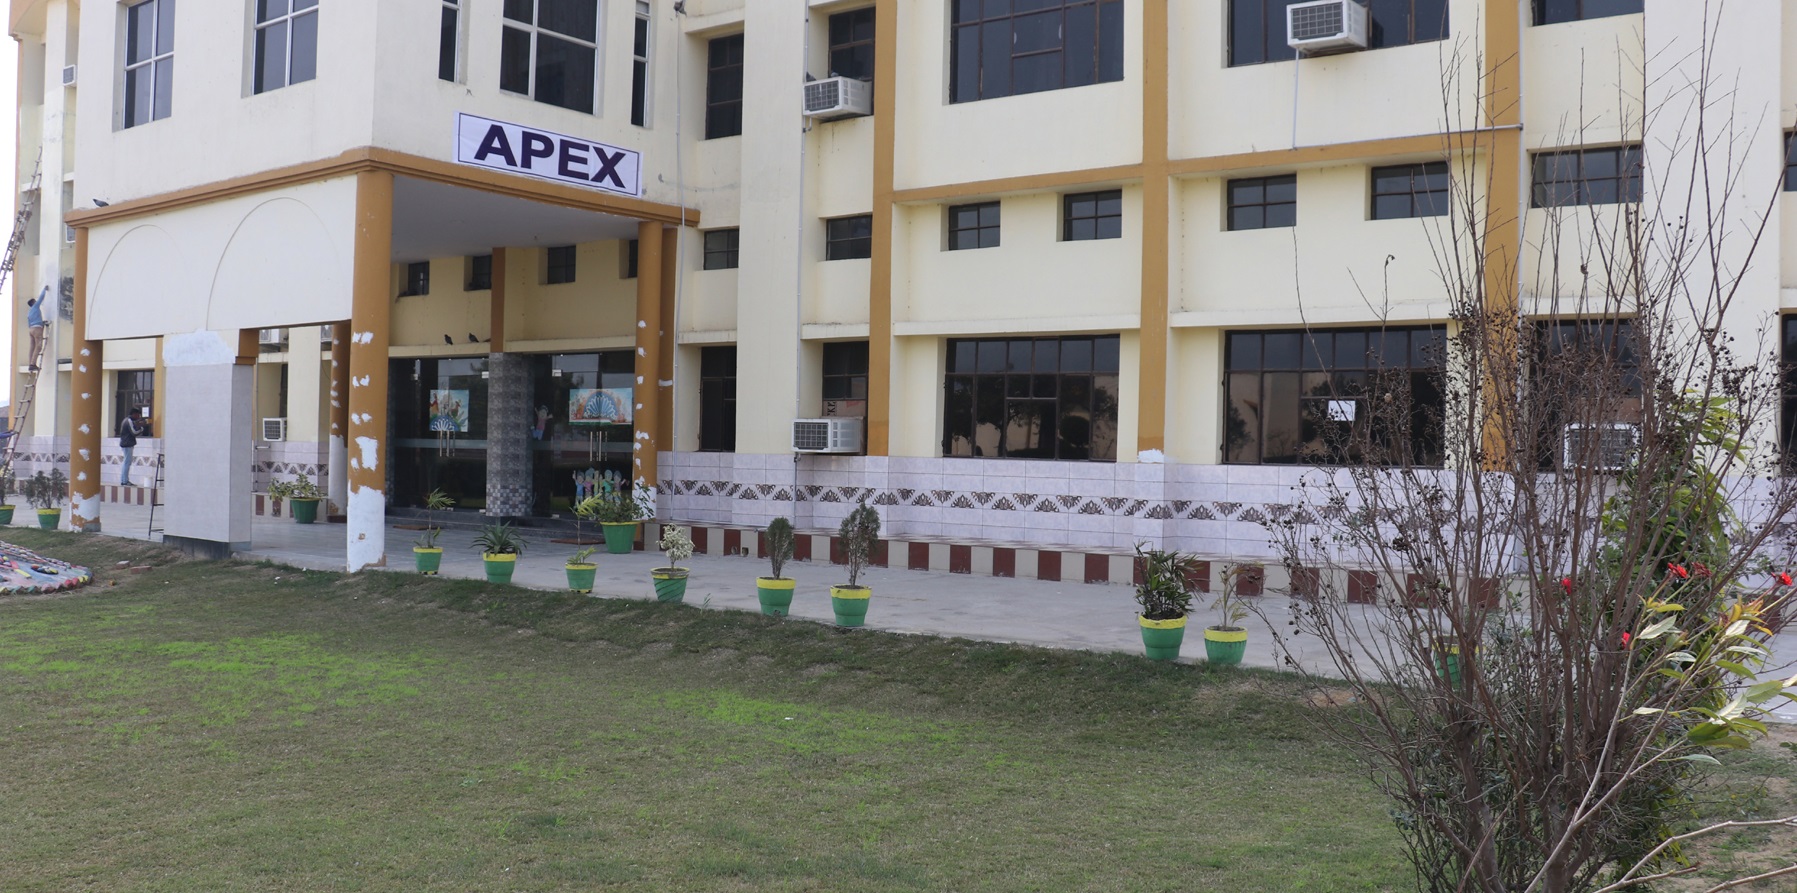 Apex Polytechnic and Engineering College, Fatehabad Image